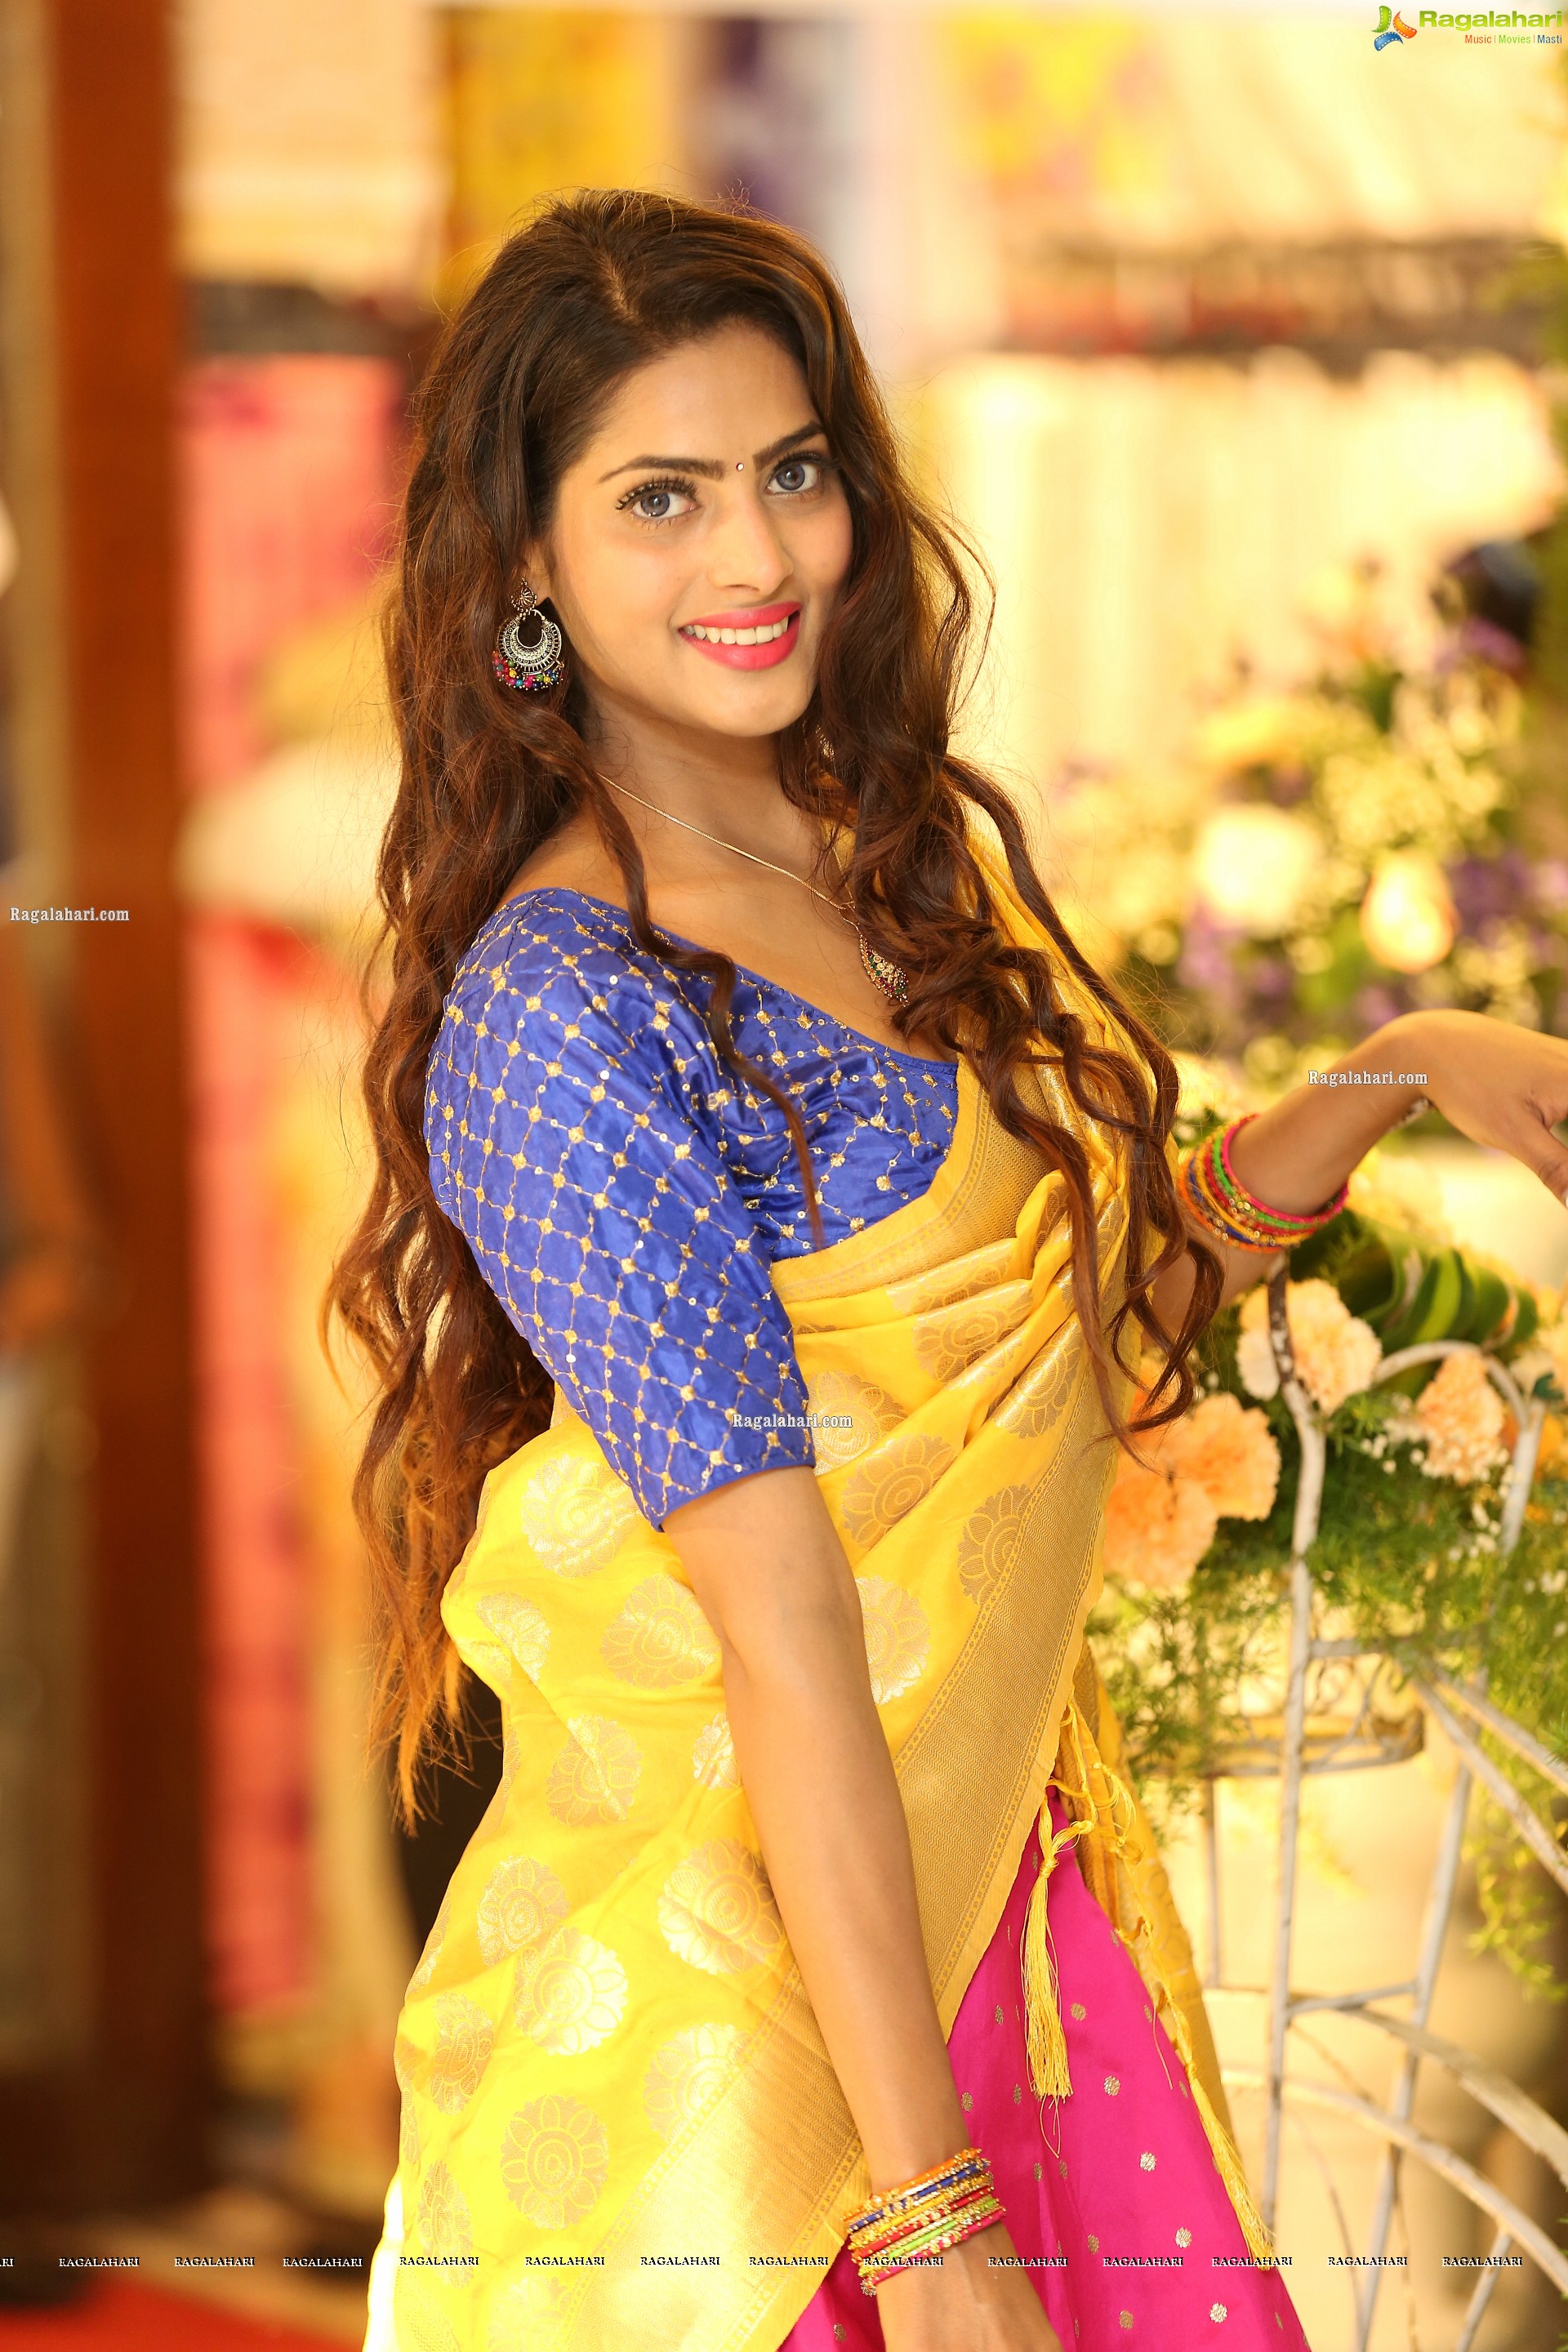 Sherry Agarwal Gorgeous Stills in Pink Lehenga and Blue Blouse with Yellow Voni, HD Photo Gallery